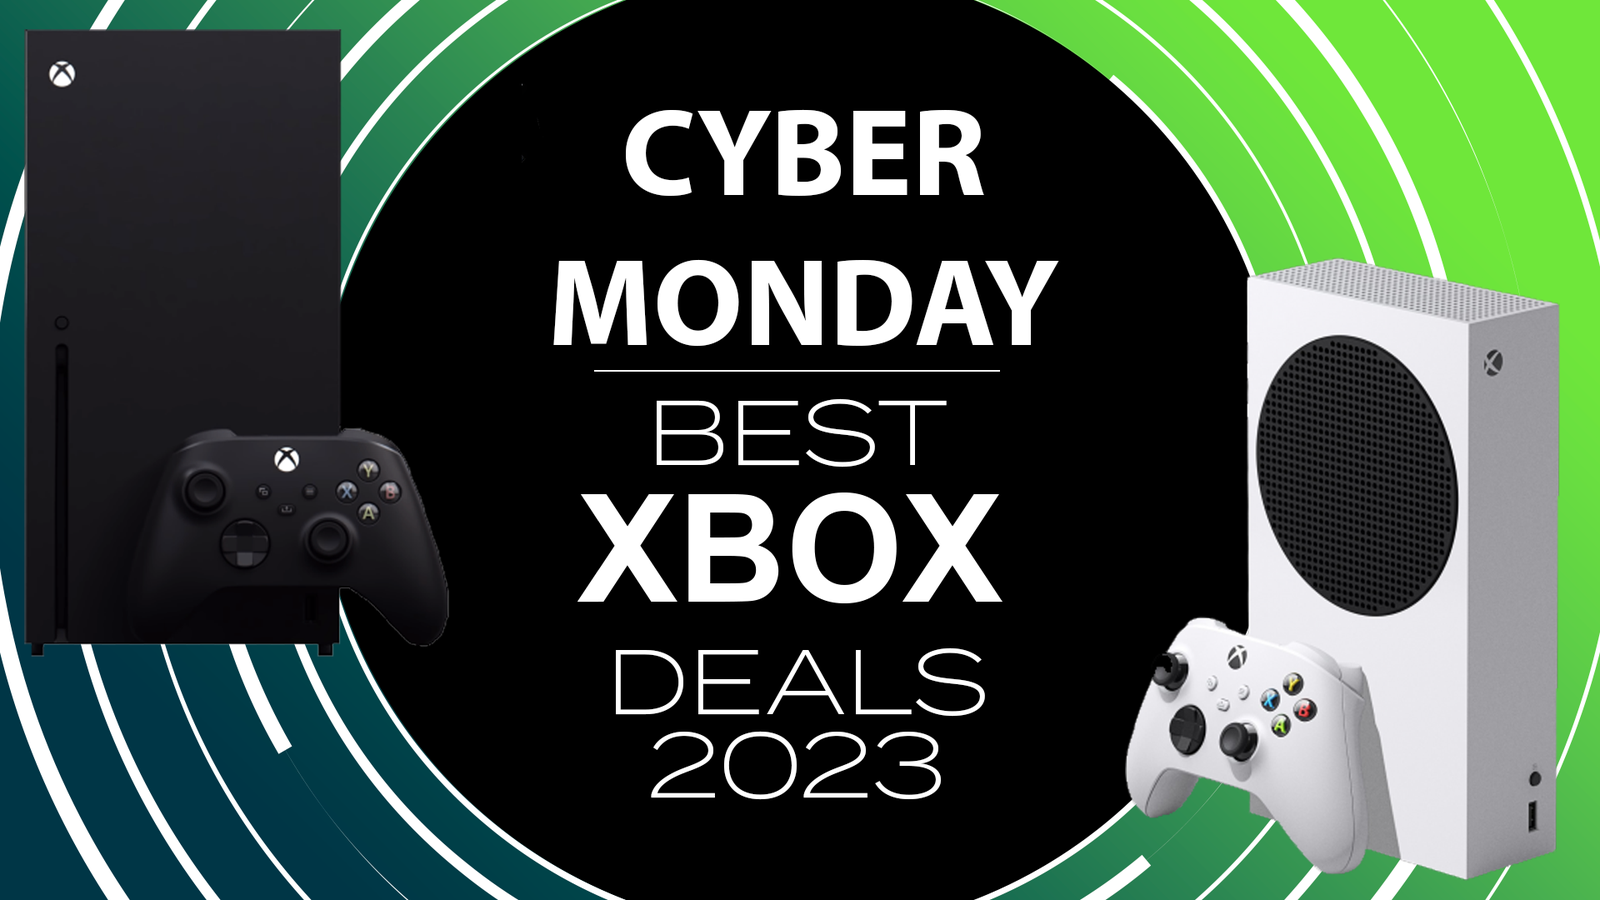 5 Xbox controller deals you don't want to miss on Cyber Monday